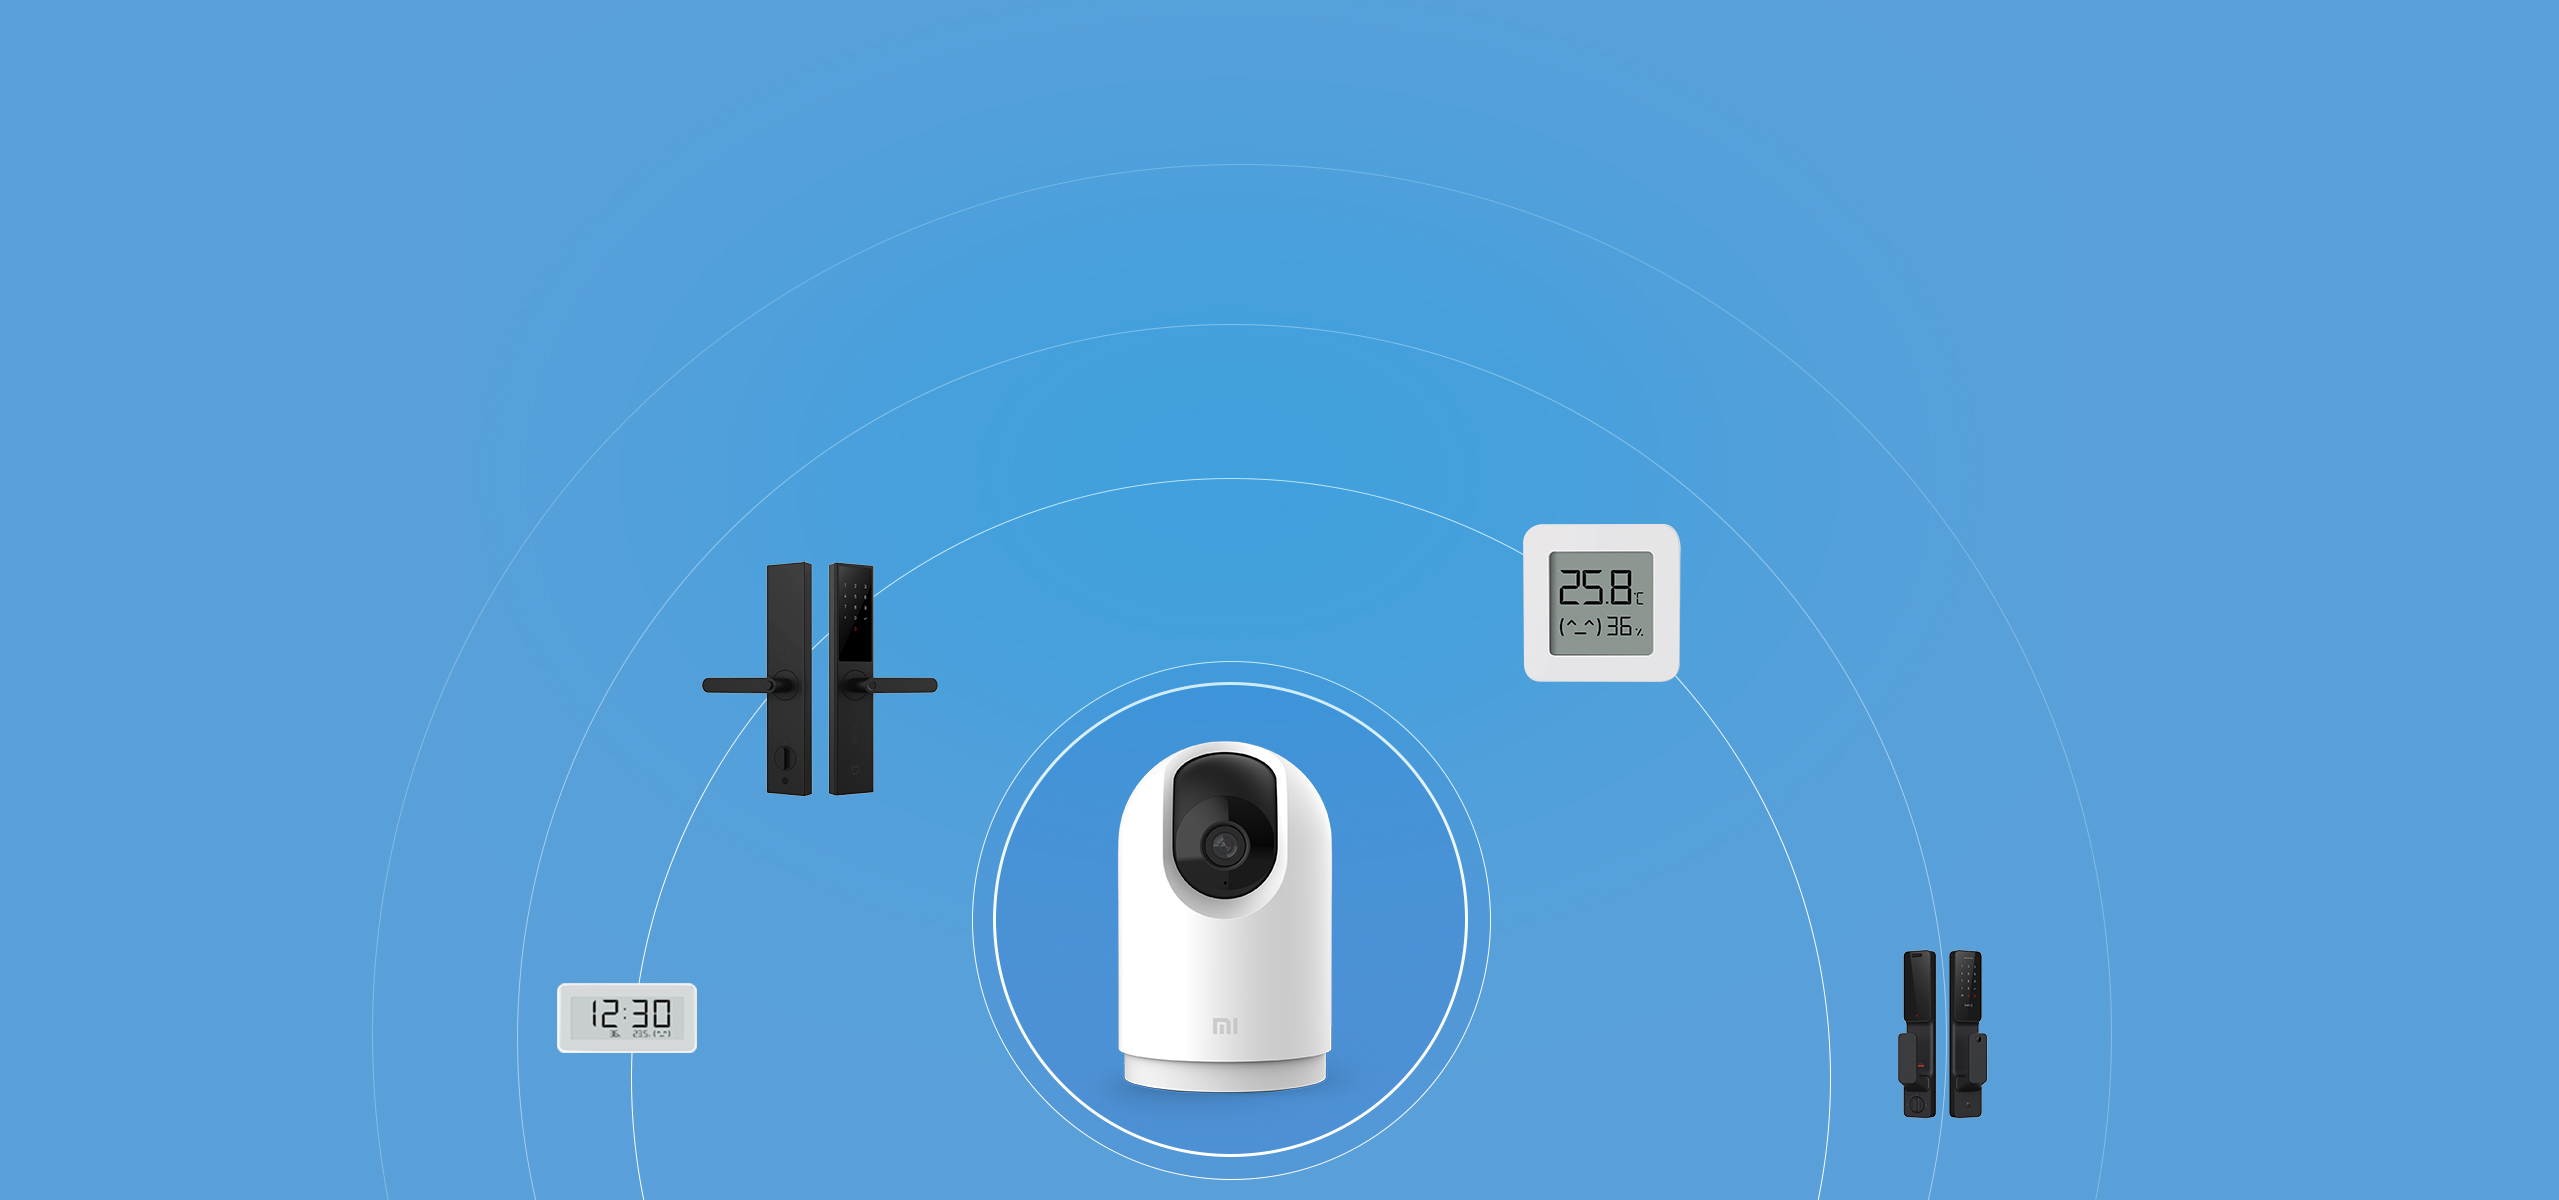 https://i01.appmifile.com/webfile/globalimg/products/pc/mi-360-home-security-camera-2k-pro/PC_27.jpg